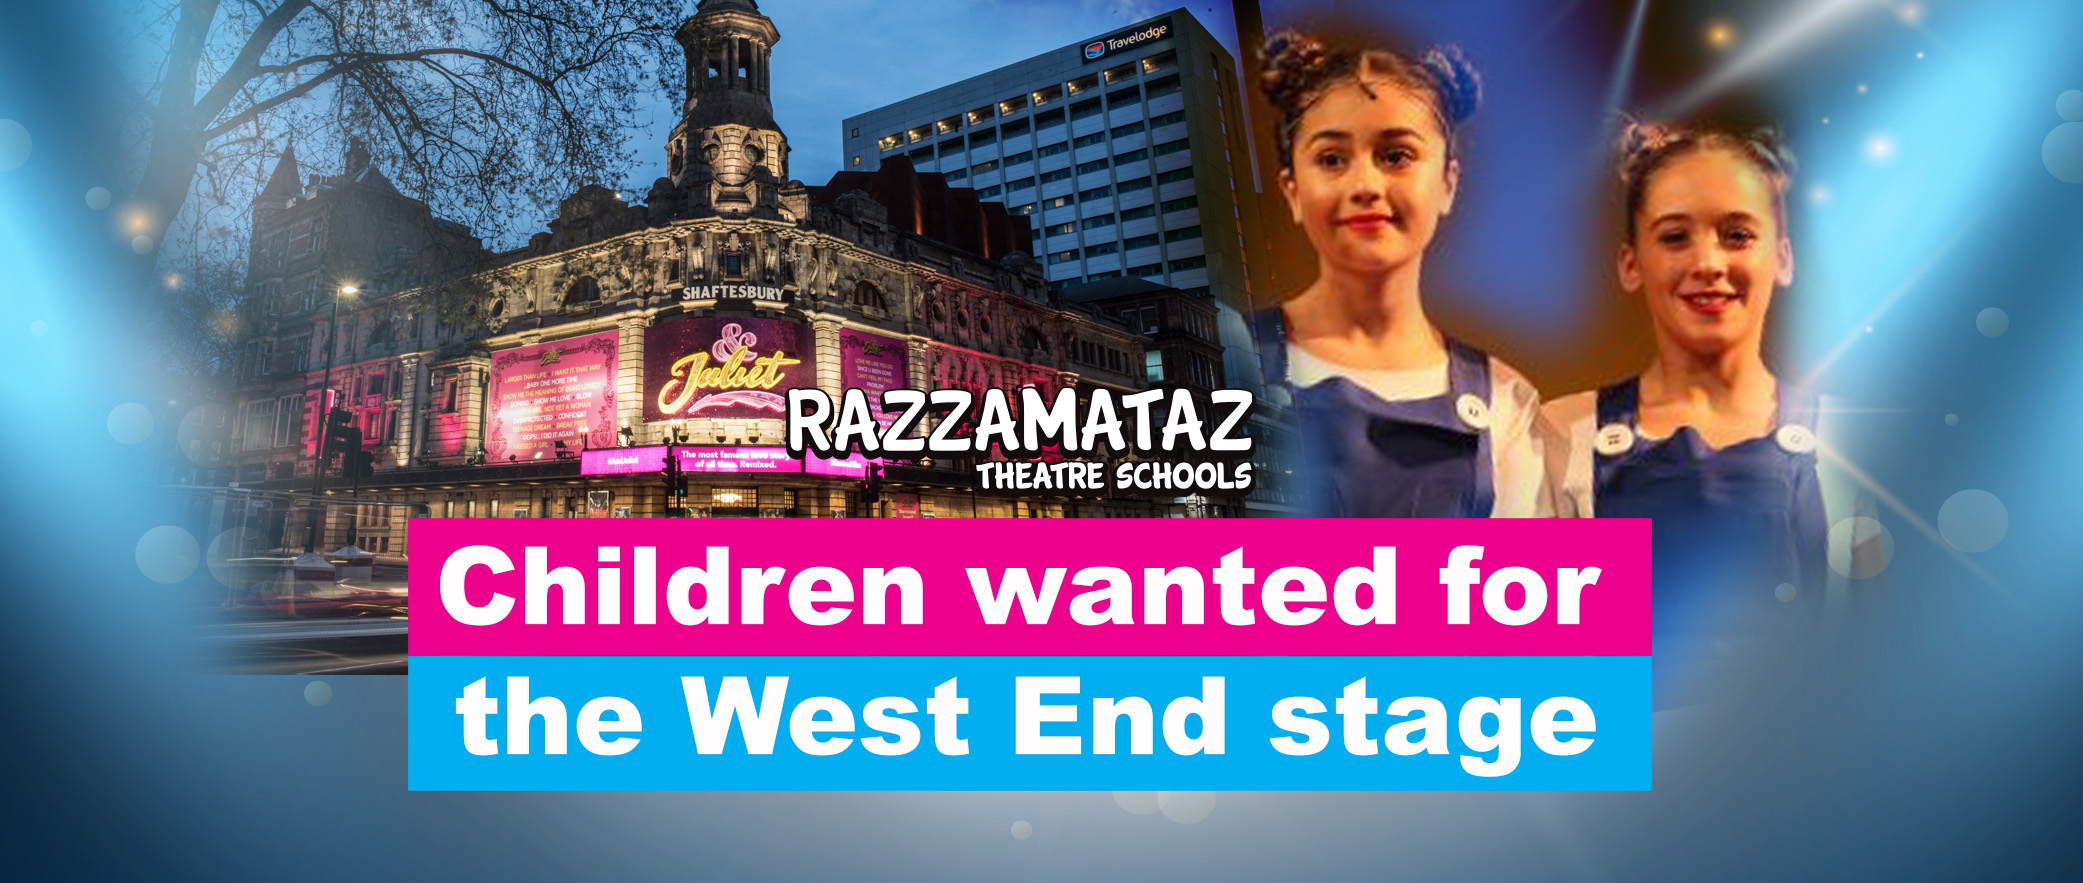 Children wanted for west end show